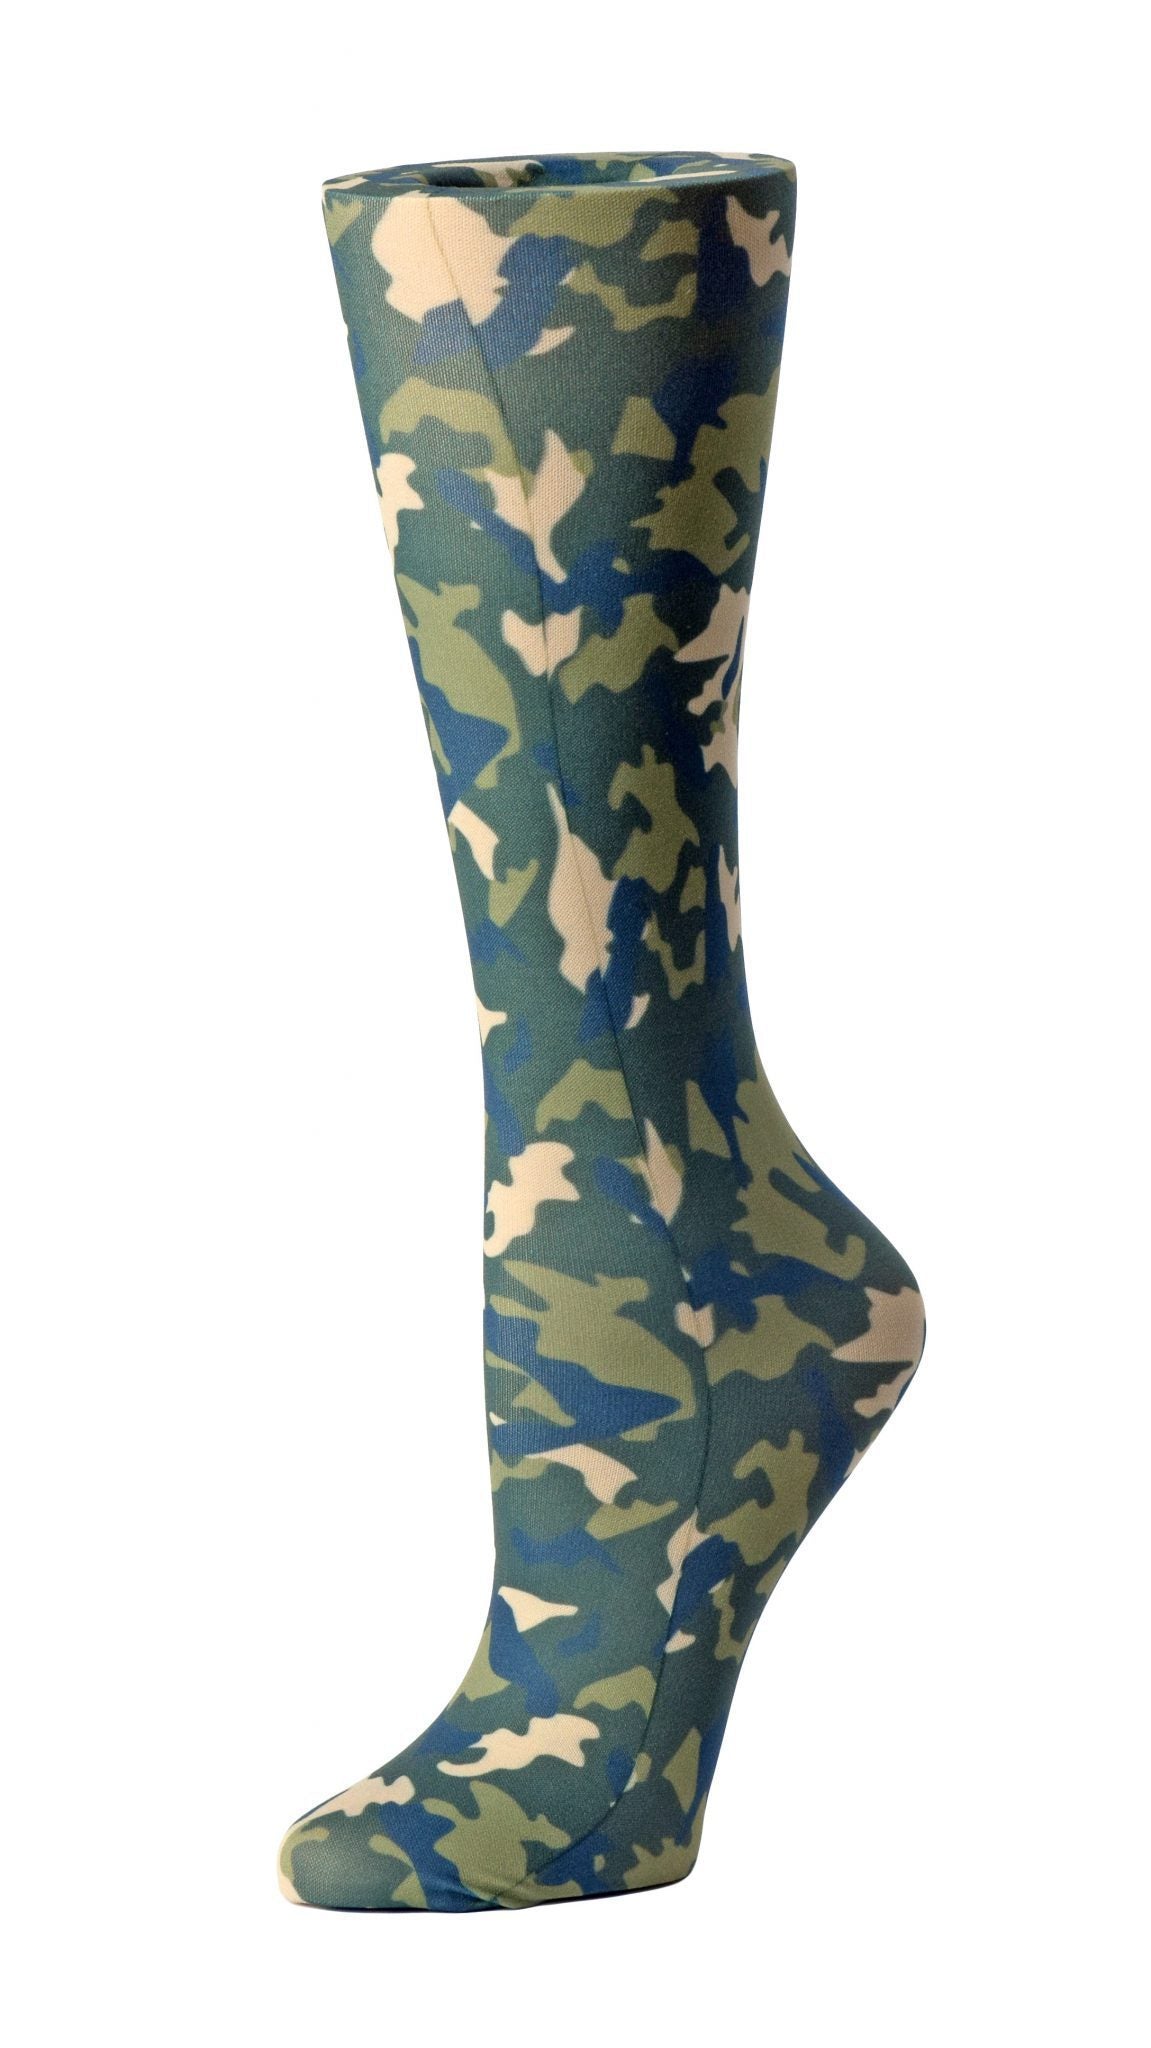 Cutieful Moderate Compression Socks 10-18 mmHg Knit in Print Patterns Green Camo at Parker's Clothing and Shoes.